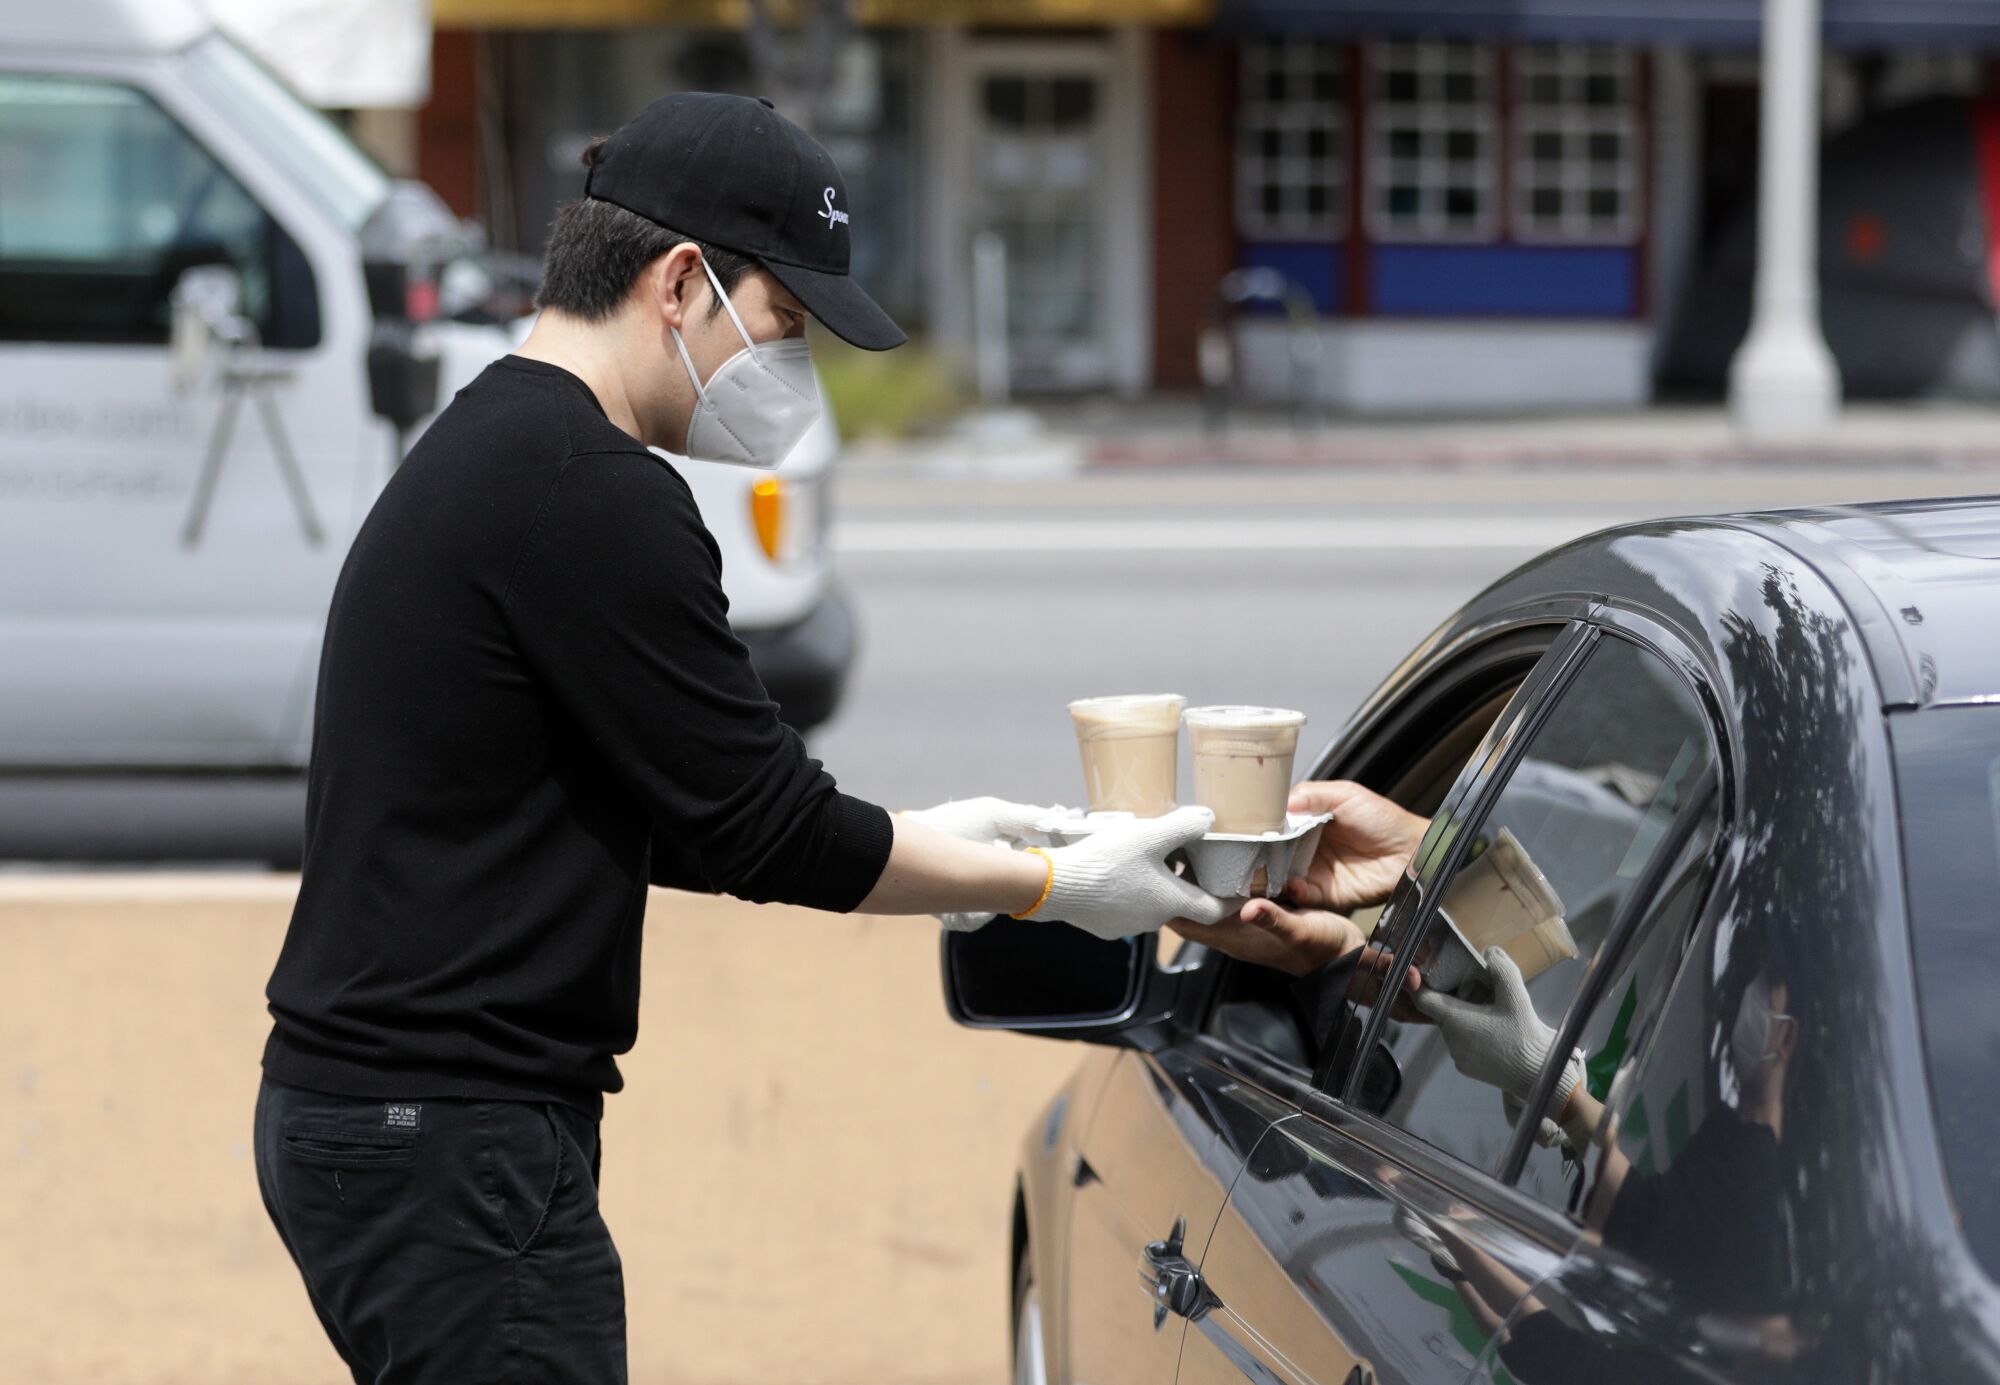 Joseph Hwang, manager of Spoon by H, hands drinks to a waiting customer.